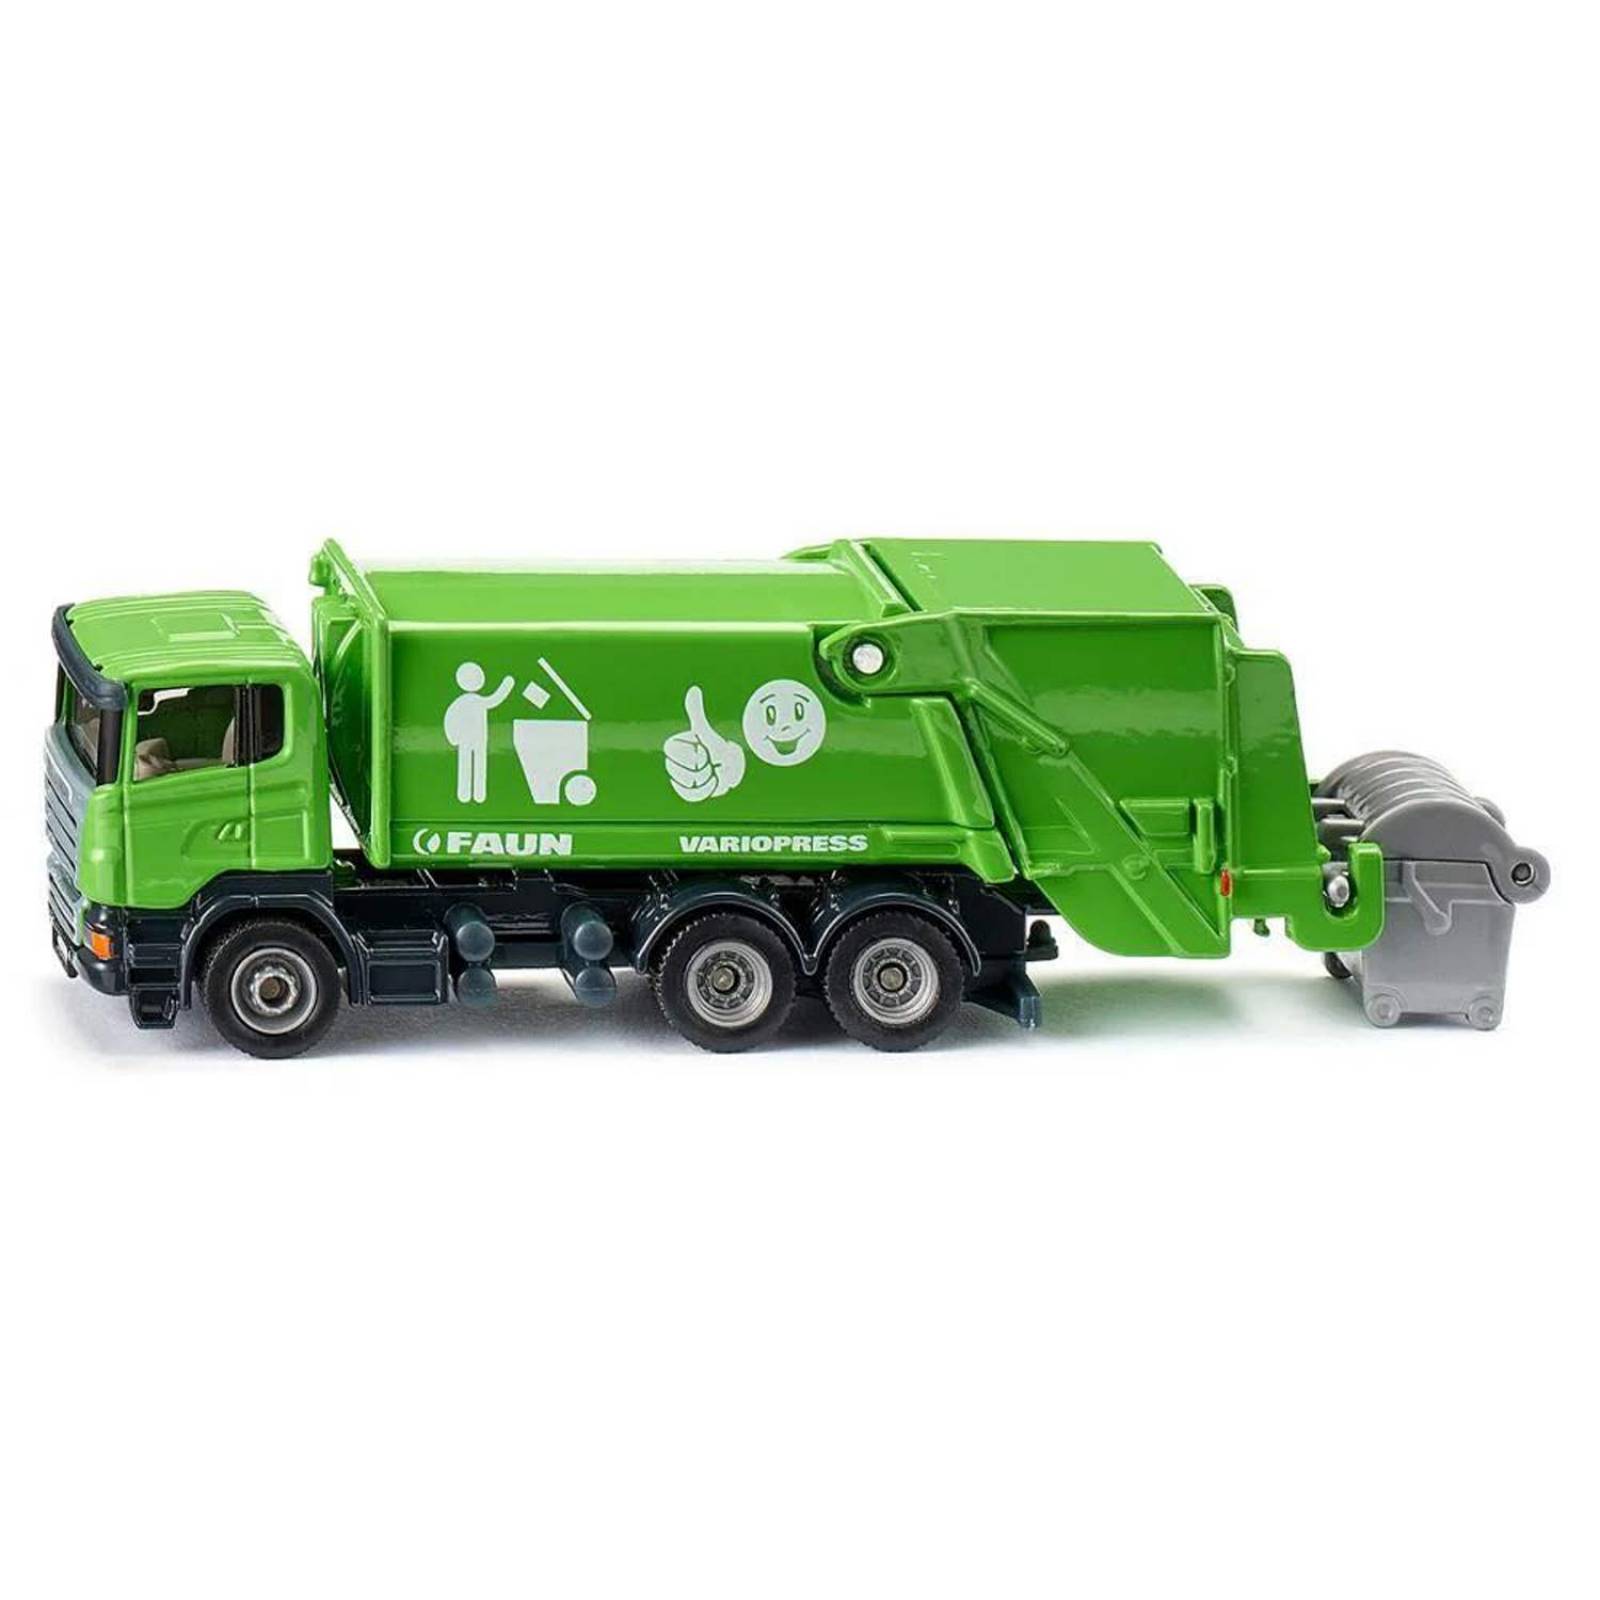 Dustbin Lorry Recycling Truck - Single Die-Cast Toy Vehicle 1890 thumbnails